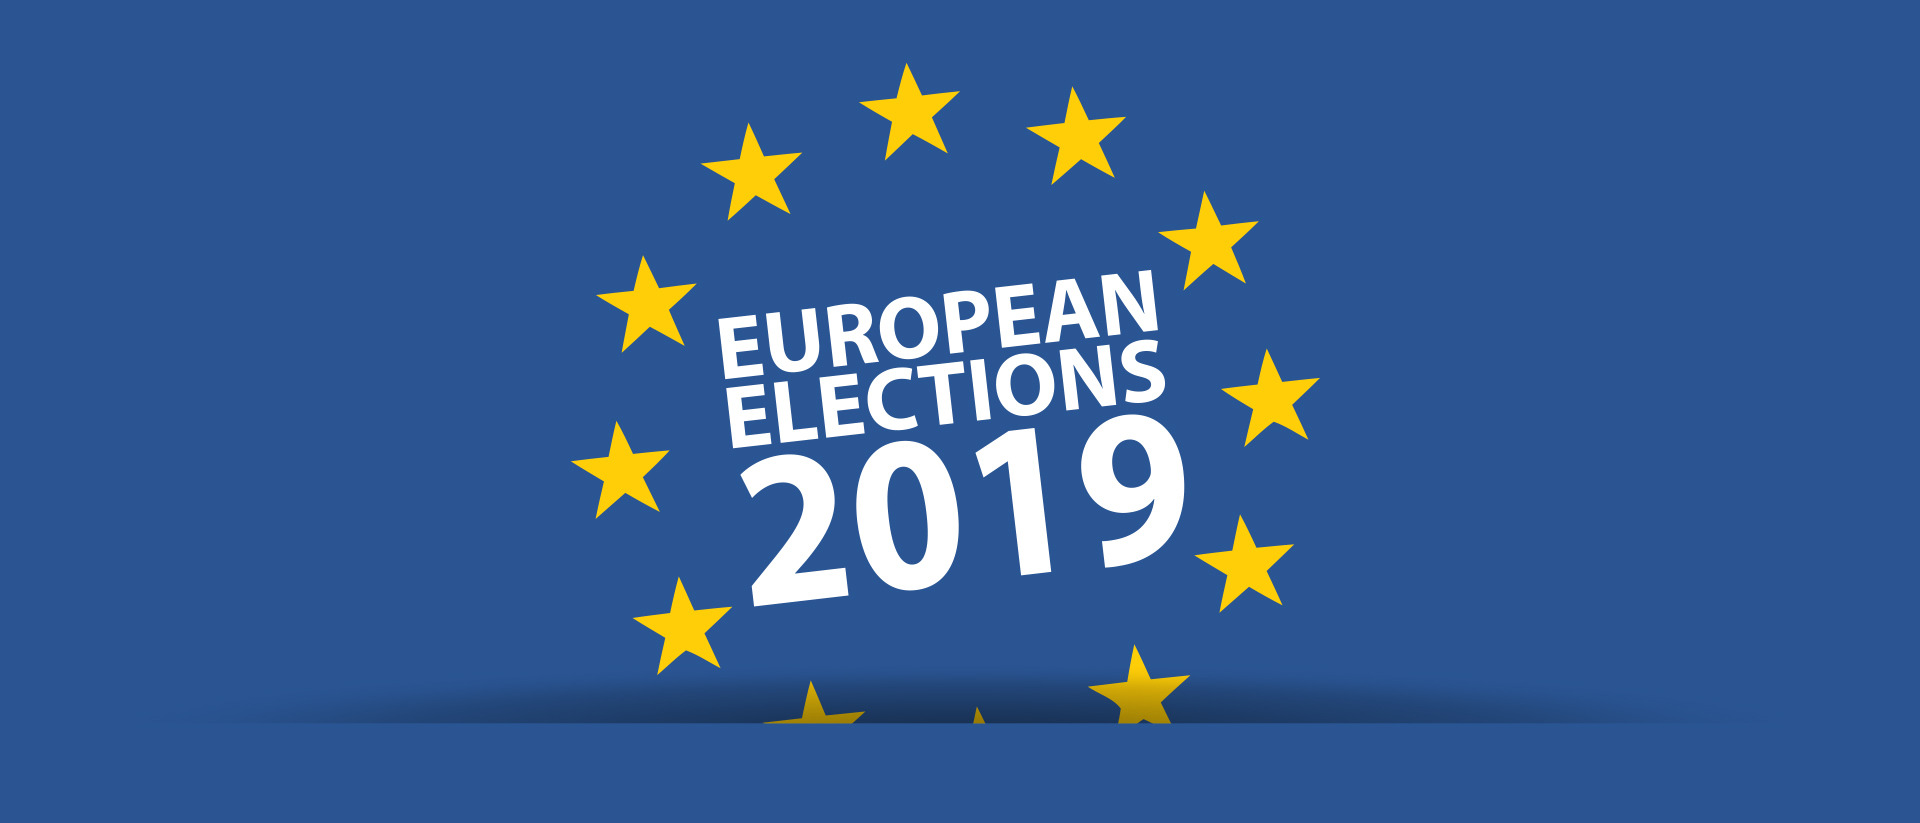 190206-euelections-1920